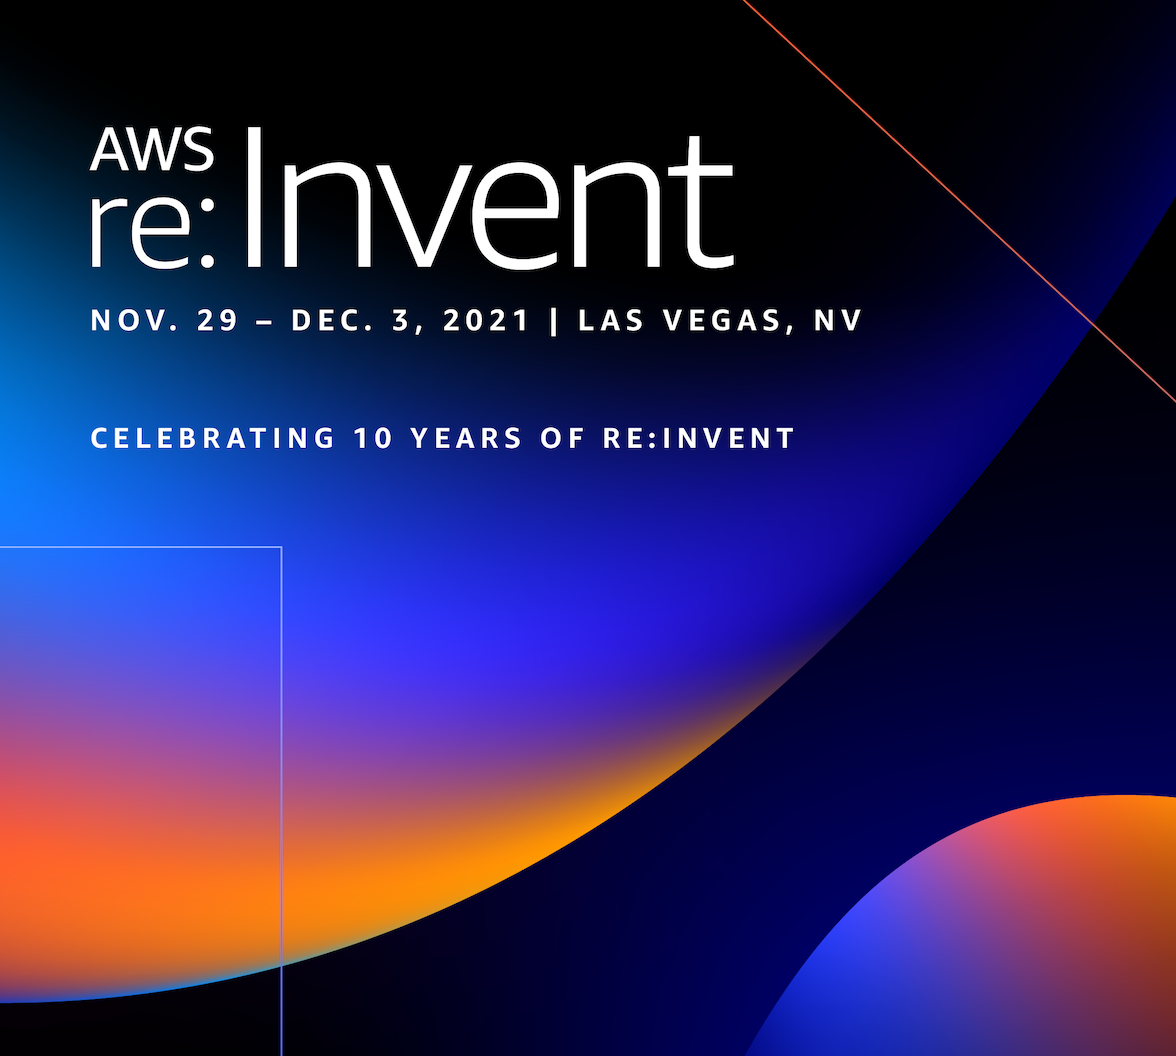 AWS reInvent is Back!